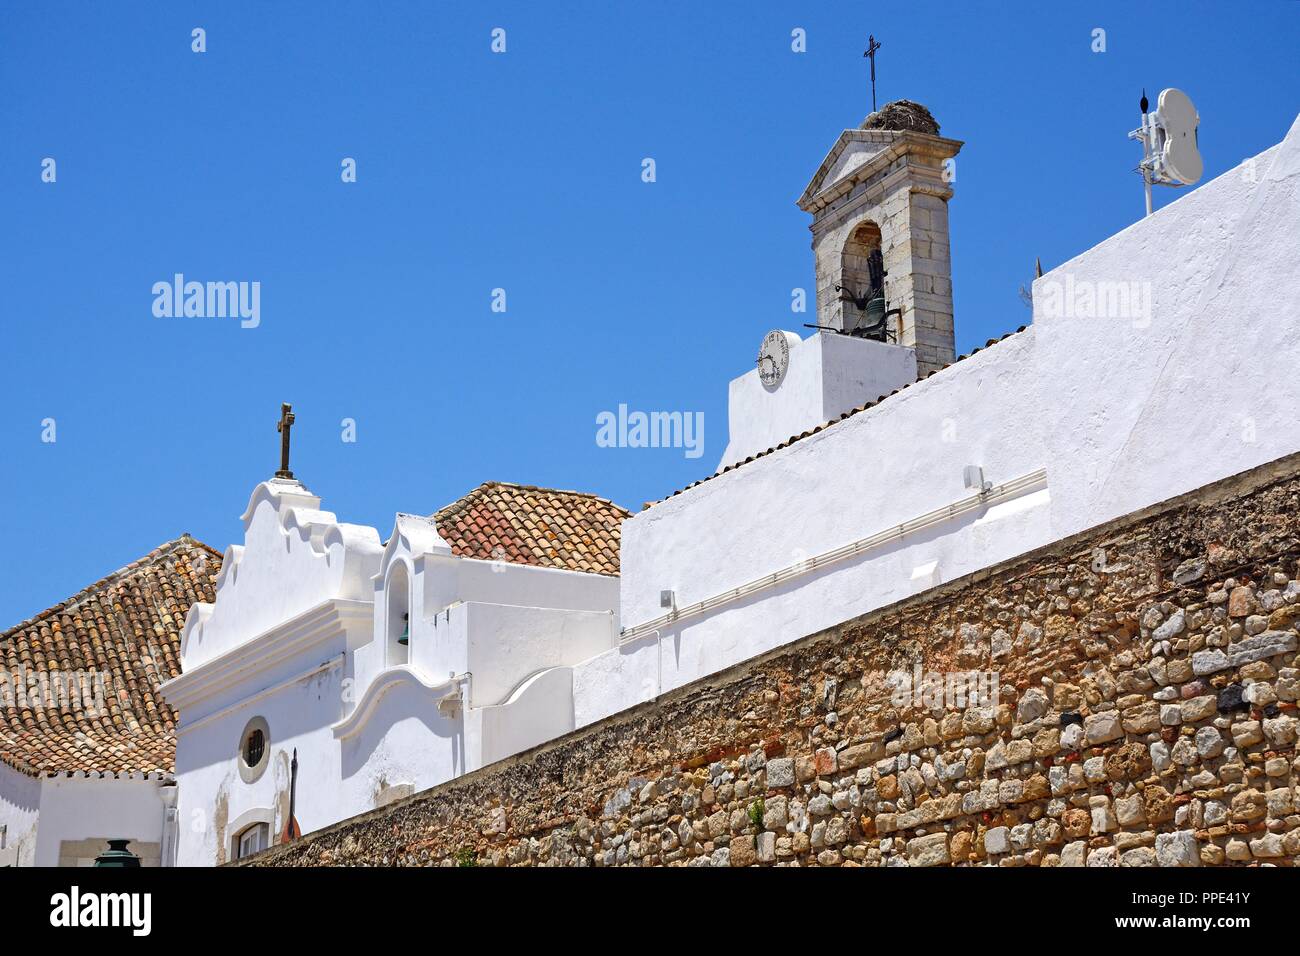 View of the rear of the 19th century city gateway wall and bell tower (Arco da Vila) in the city centre, Faro, Algarve, Portugal, Europe. Stock Photo